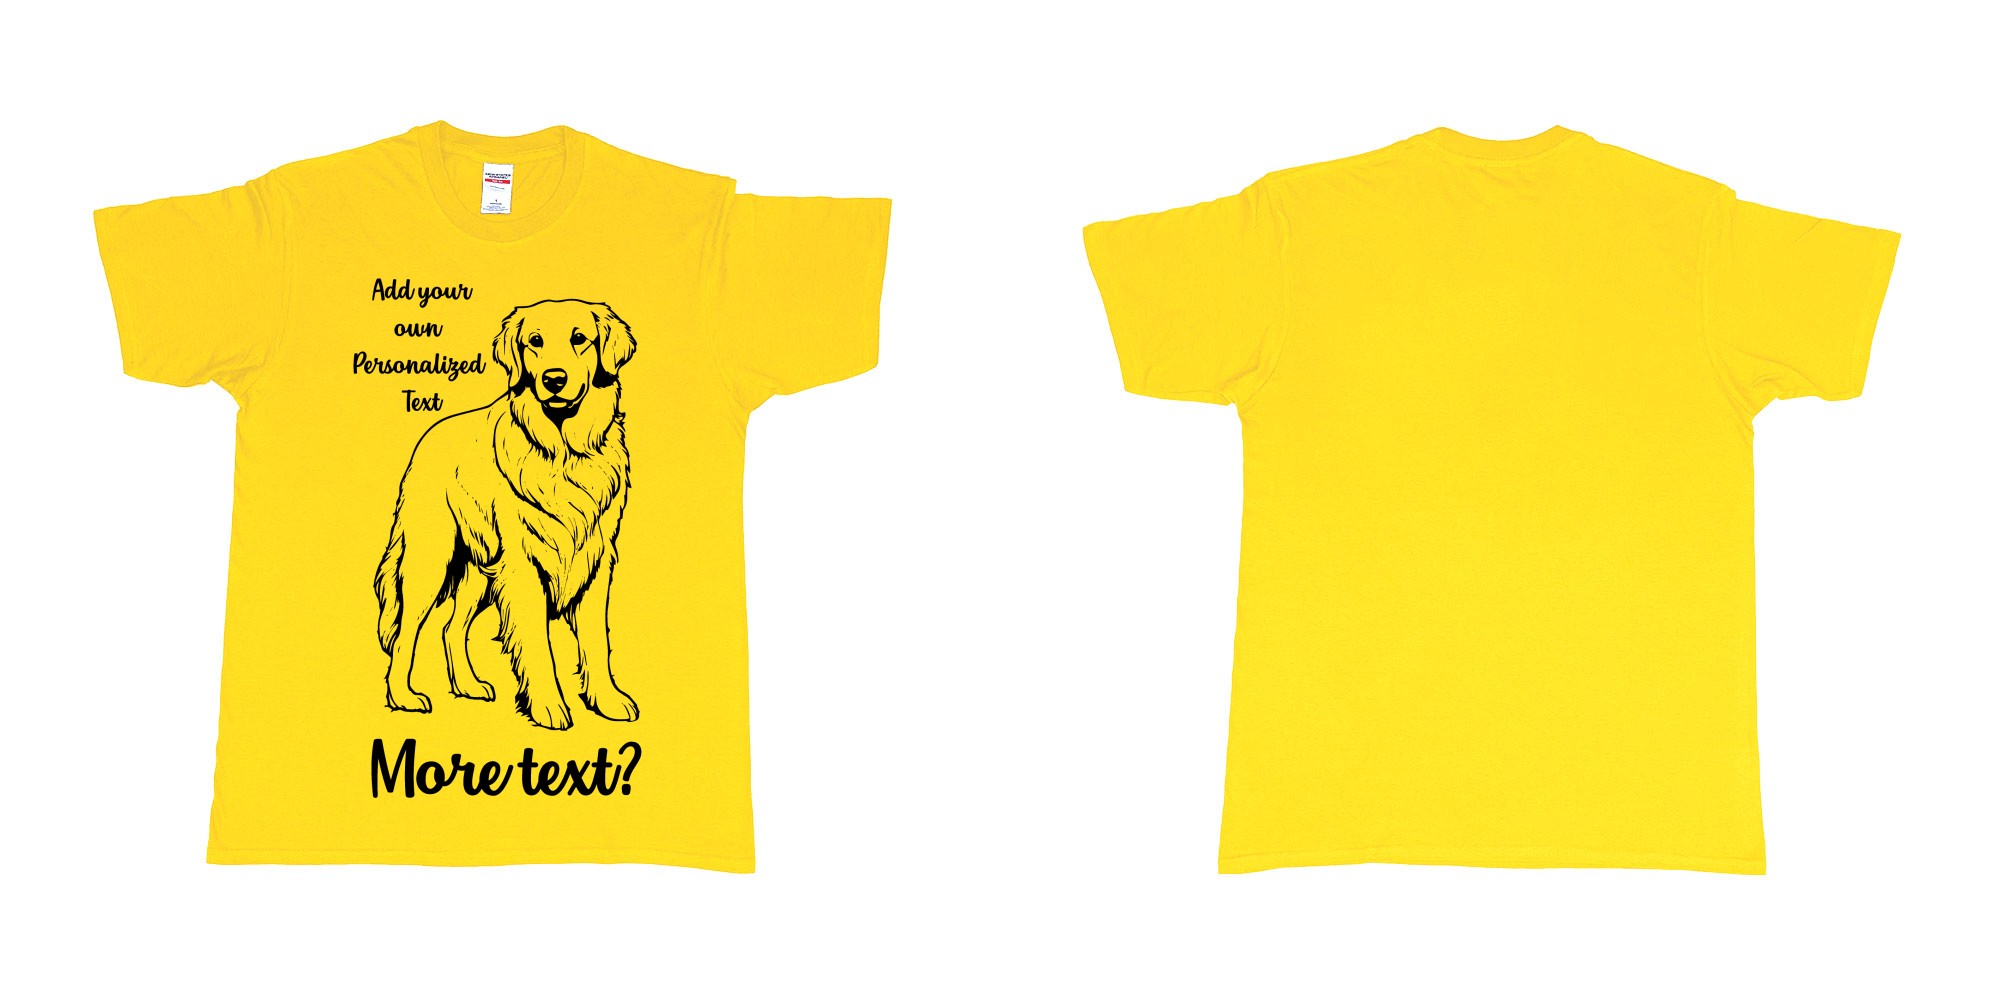 Custom tshirt design golden retriever dog breed personalized text in fabric color daisy choice your own text made in Bali by The Pirate Way